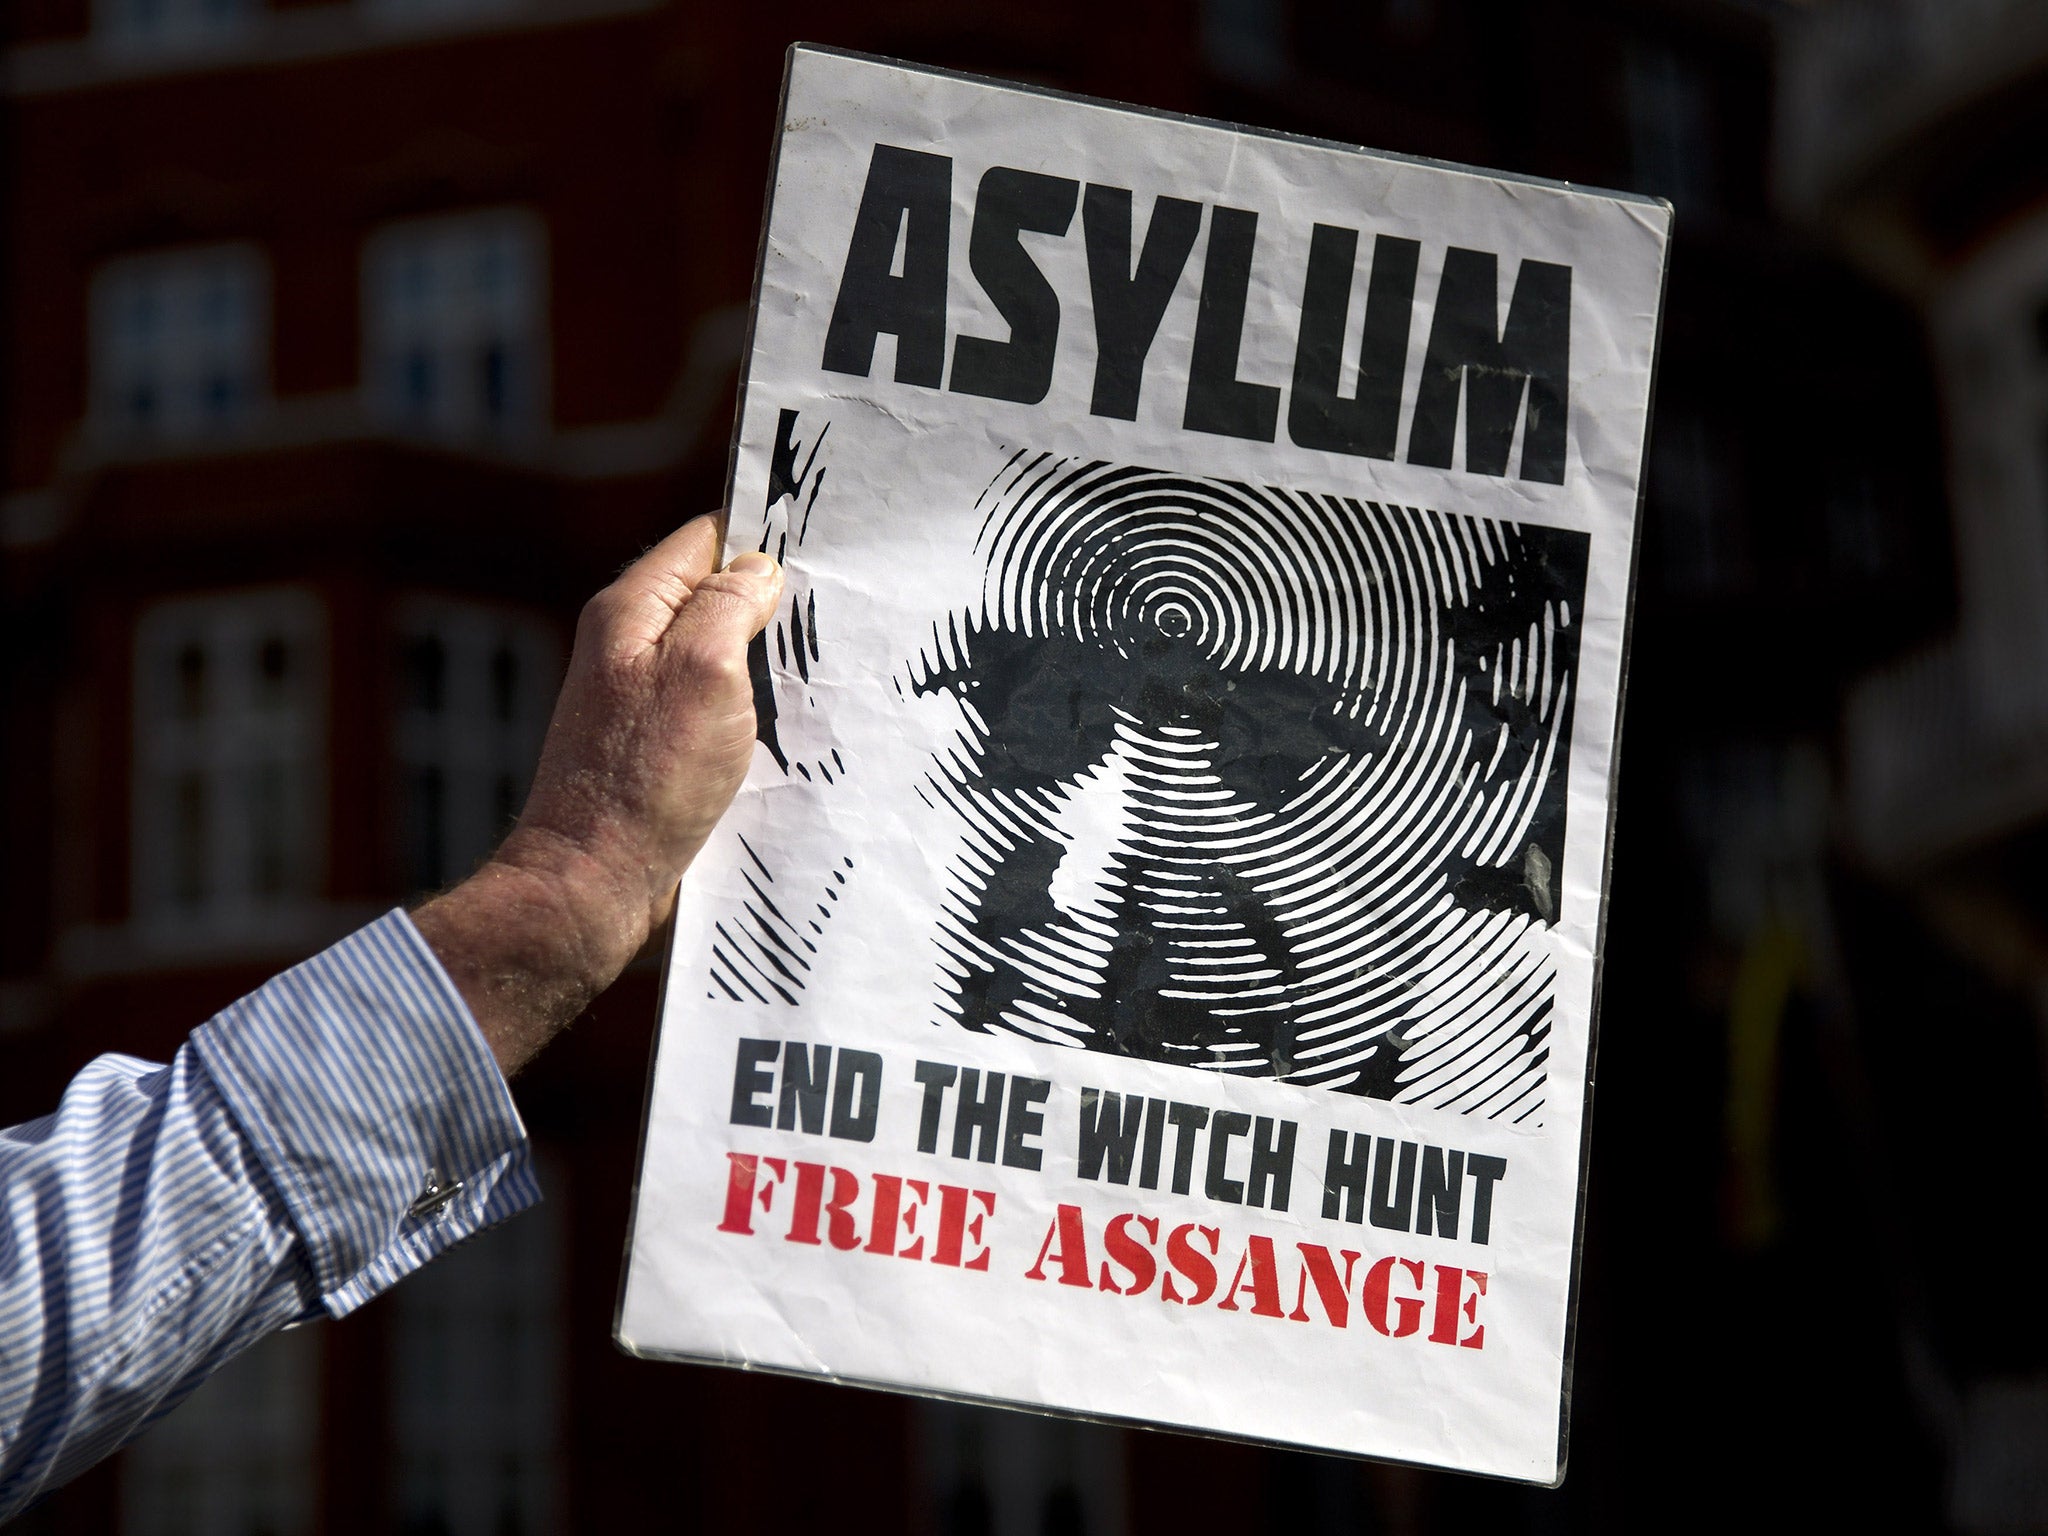 Assange has been living in the Ecuadorean embassy in London, seeking to avoid extradition to Sweden